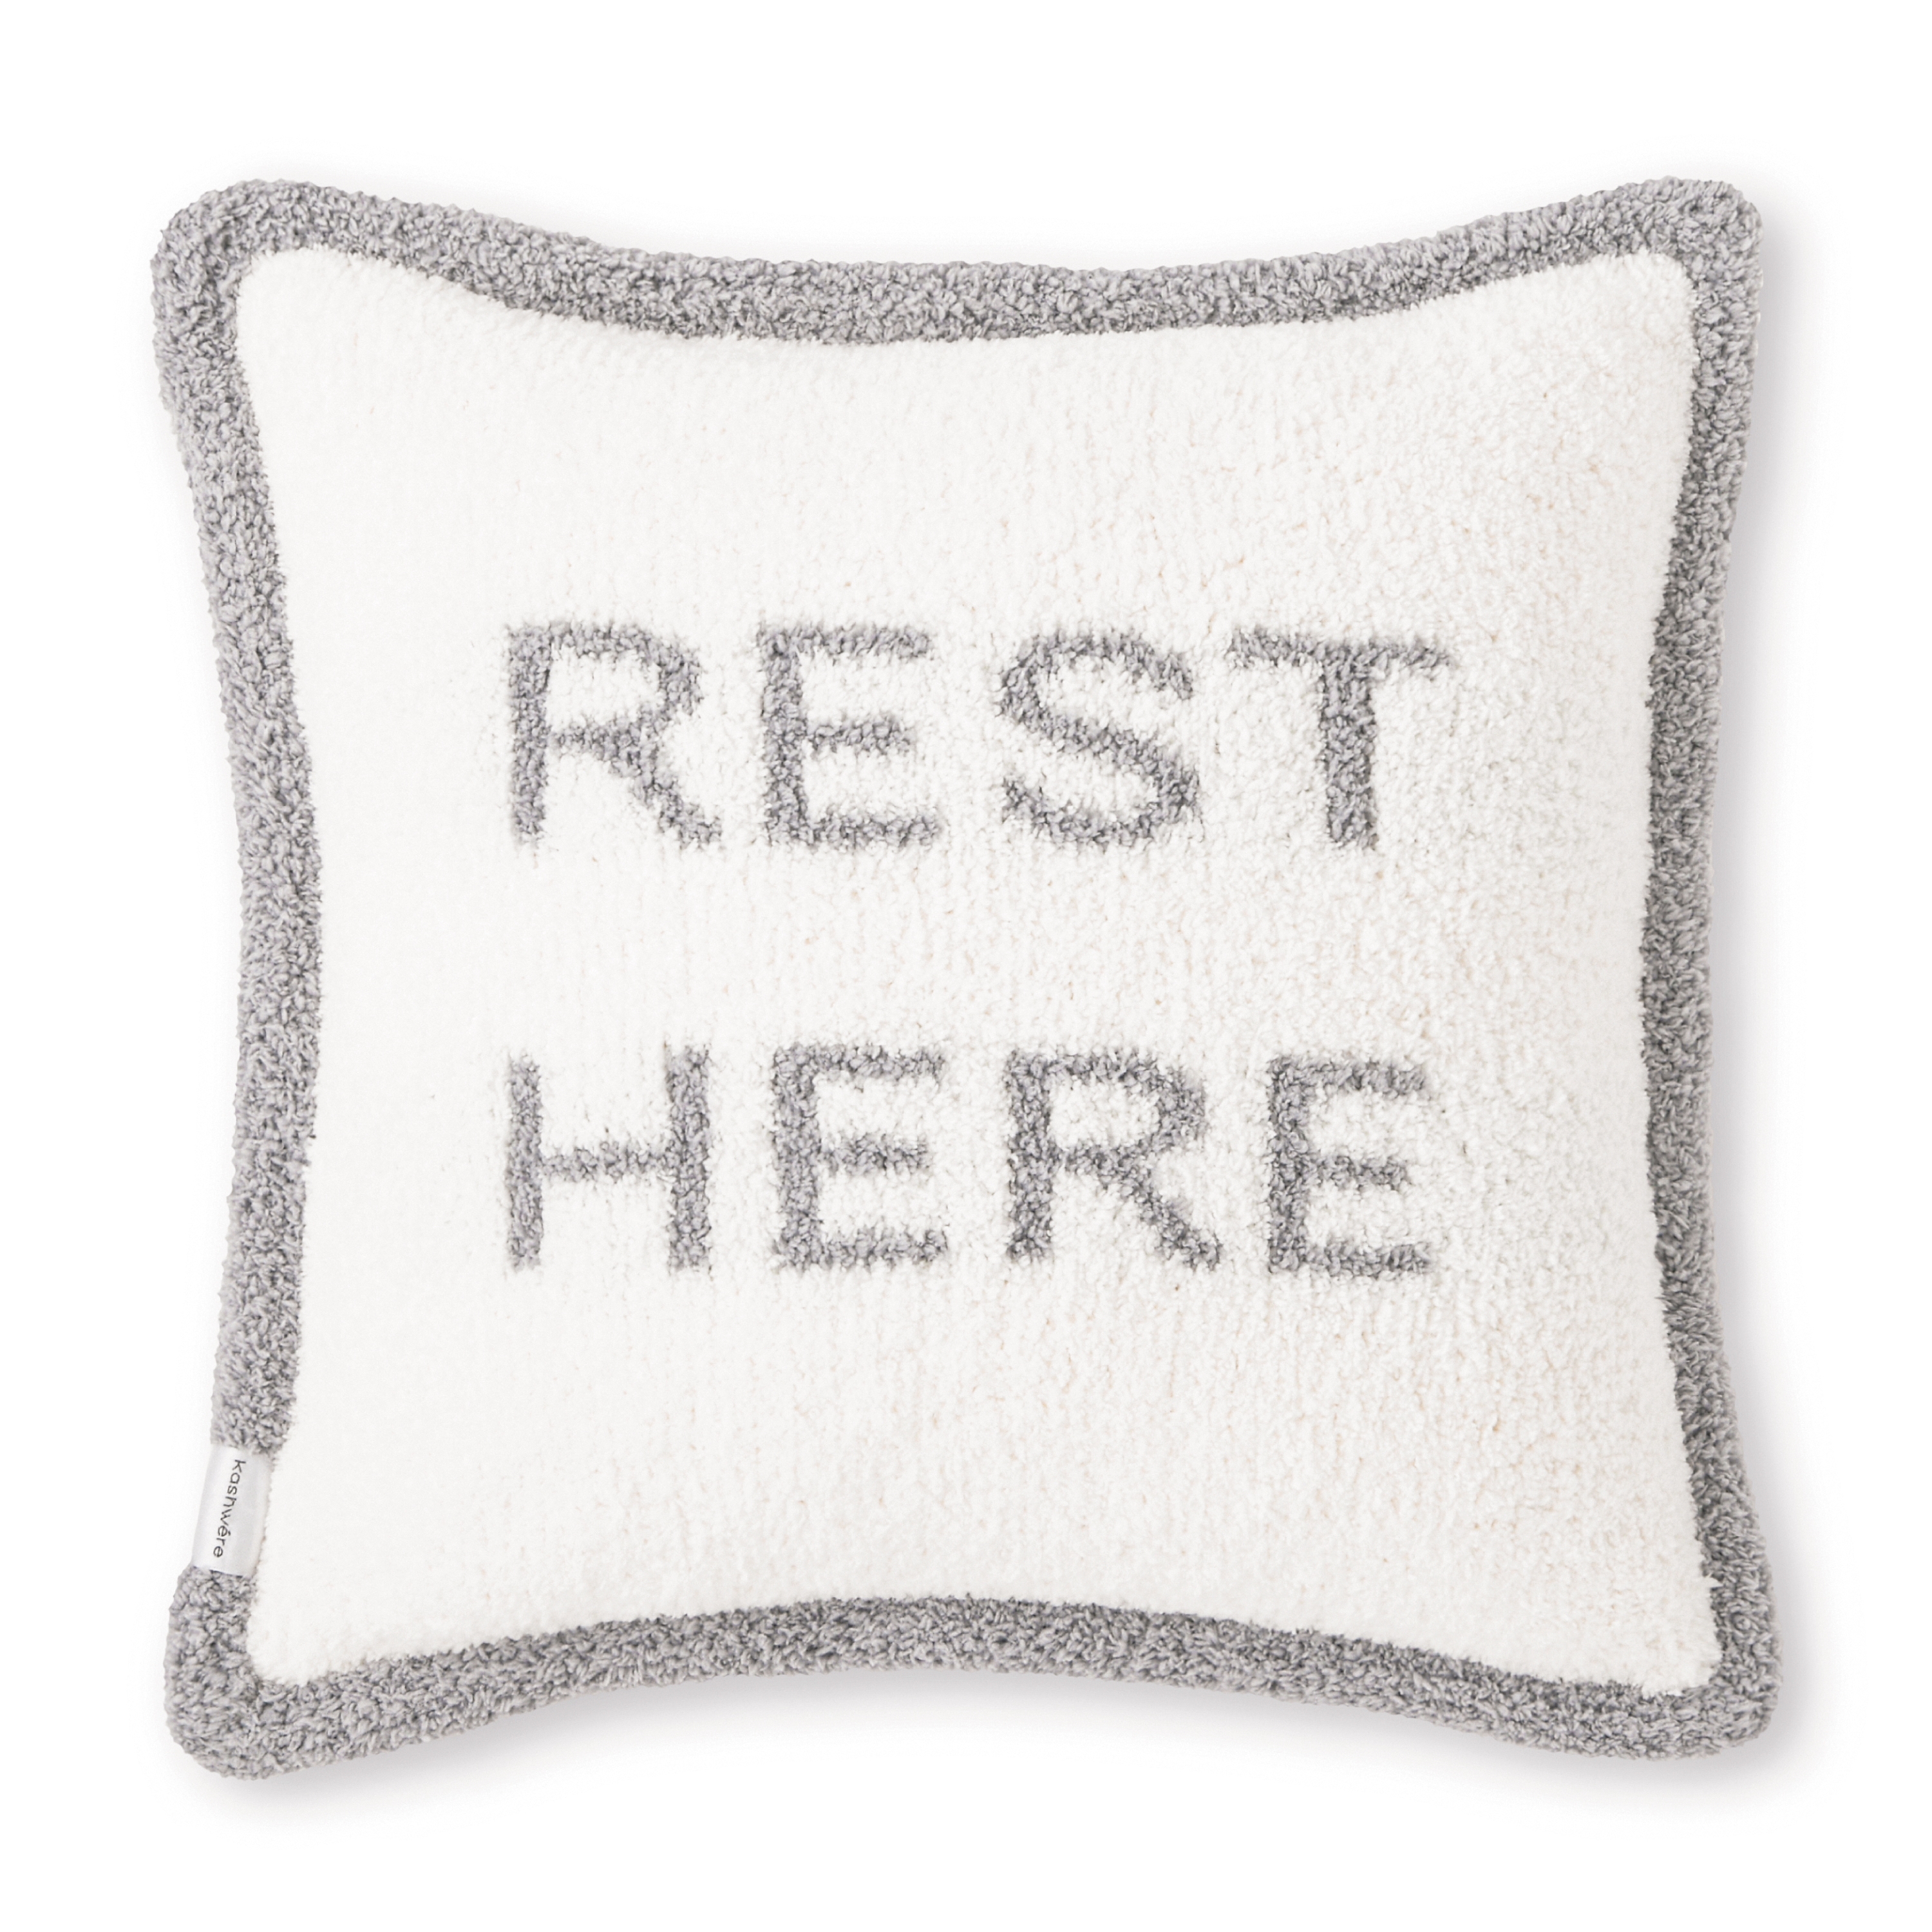 CUSHION COVER / MESSAGE